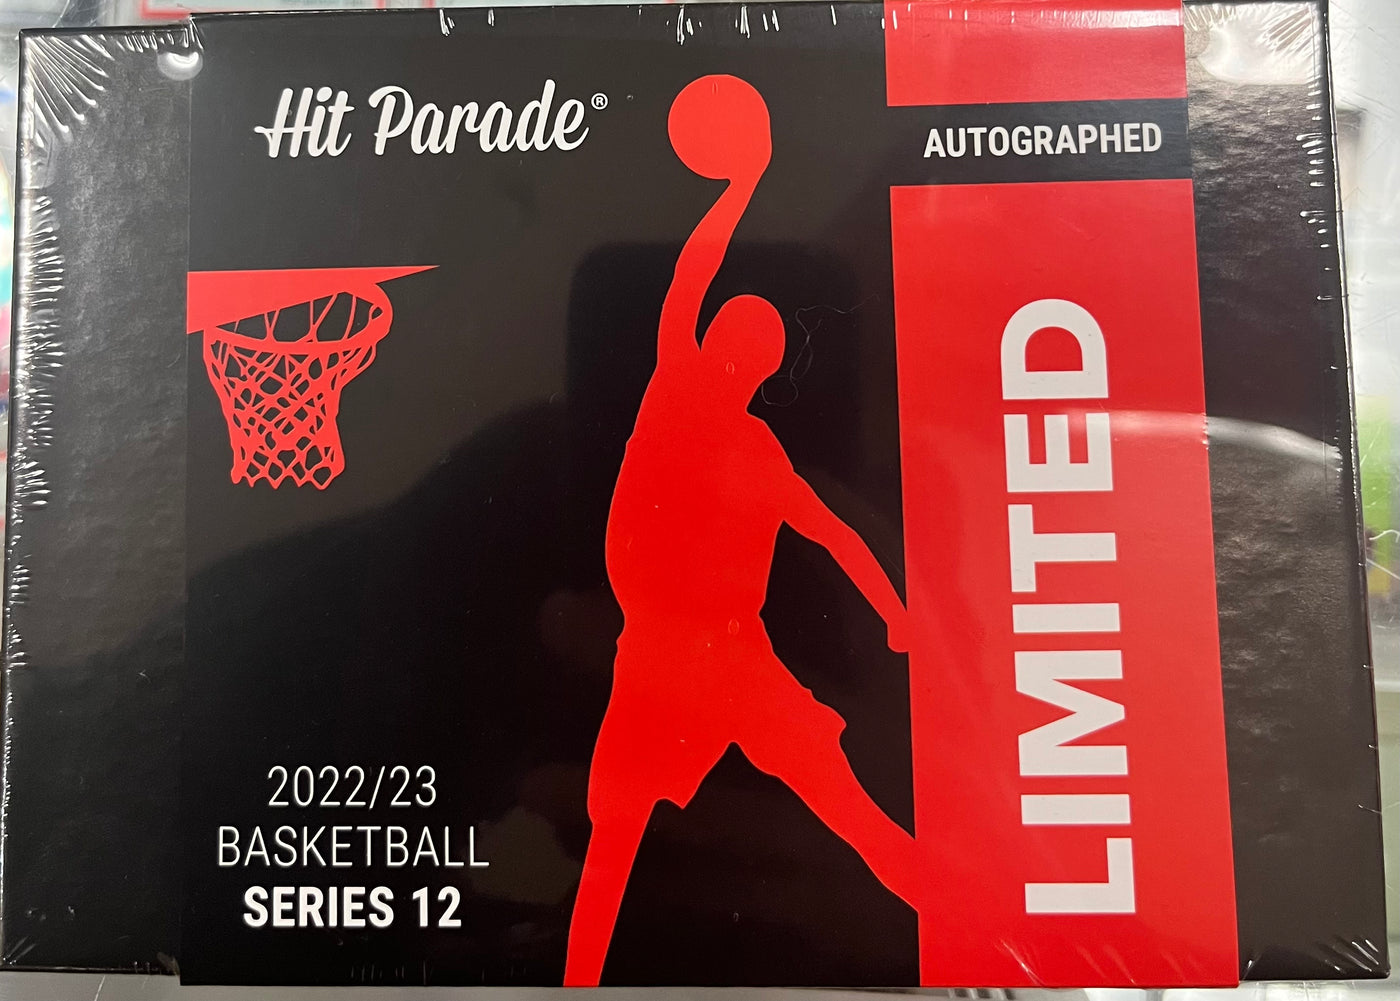 2022/23 Hit Parade Basketball Autographed Edition Series 12